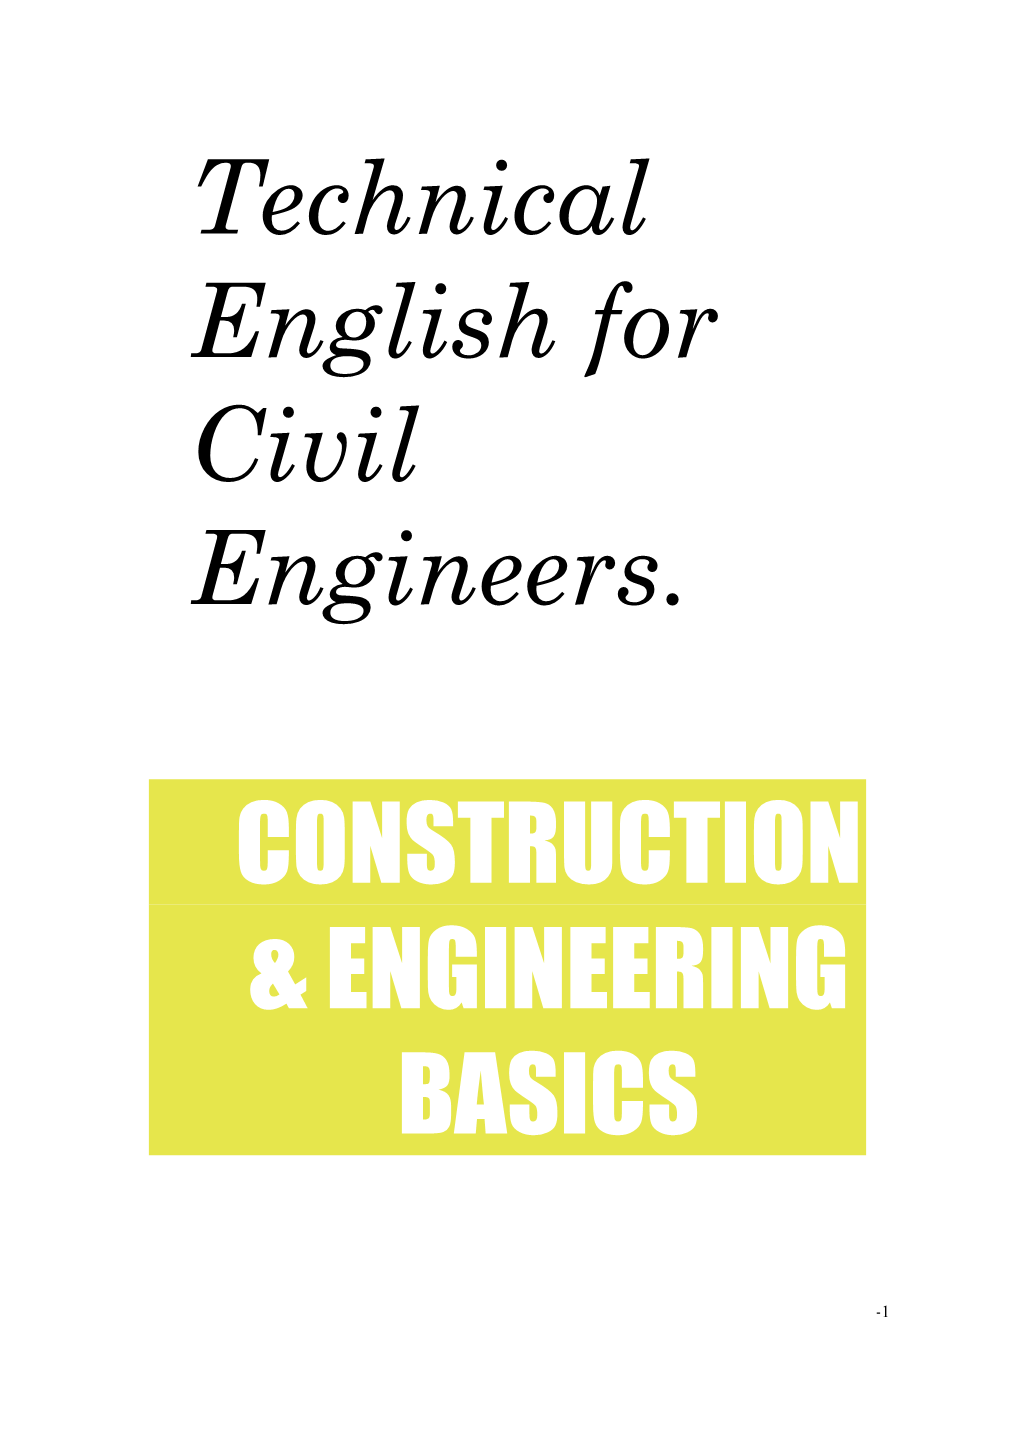 Technical English for Civil Engineers. Construction & Engineering Basics